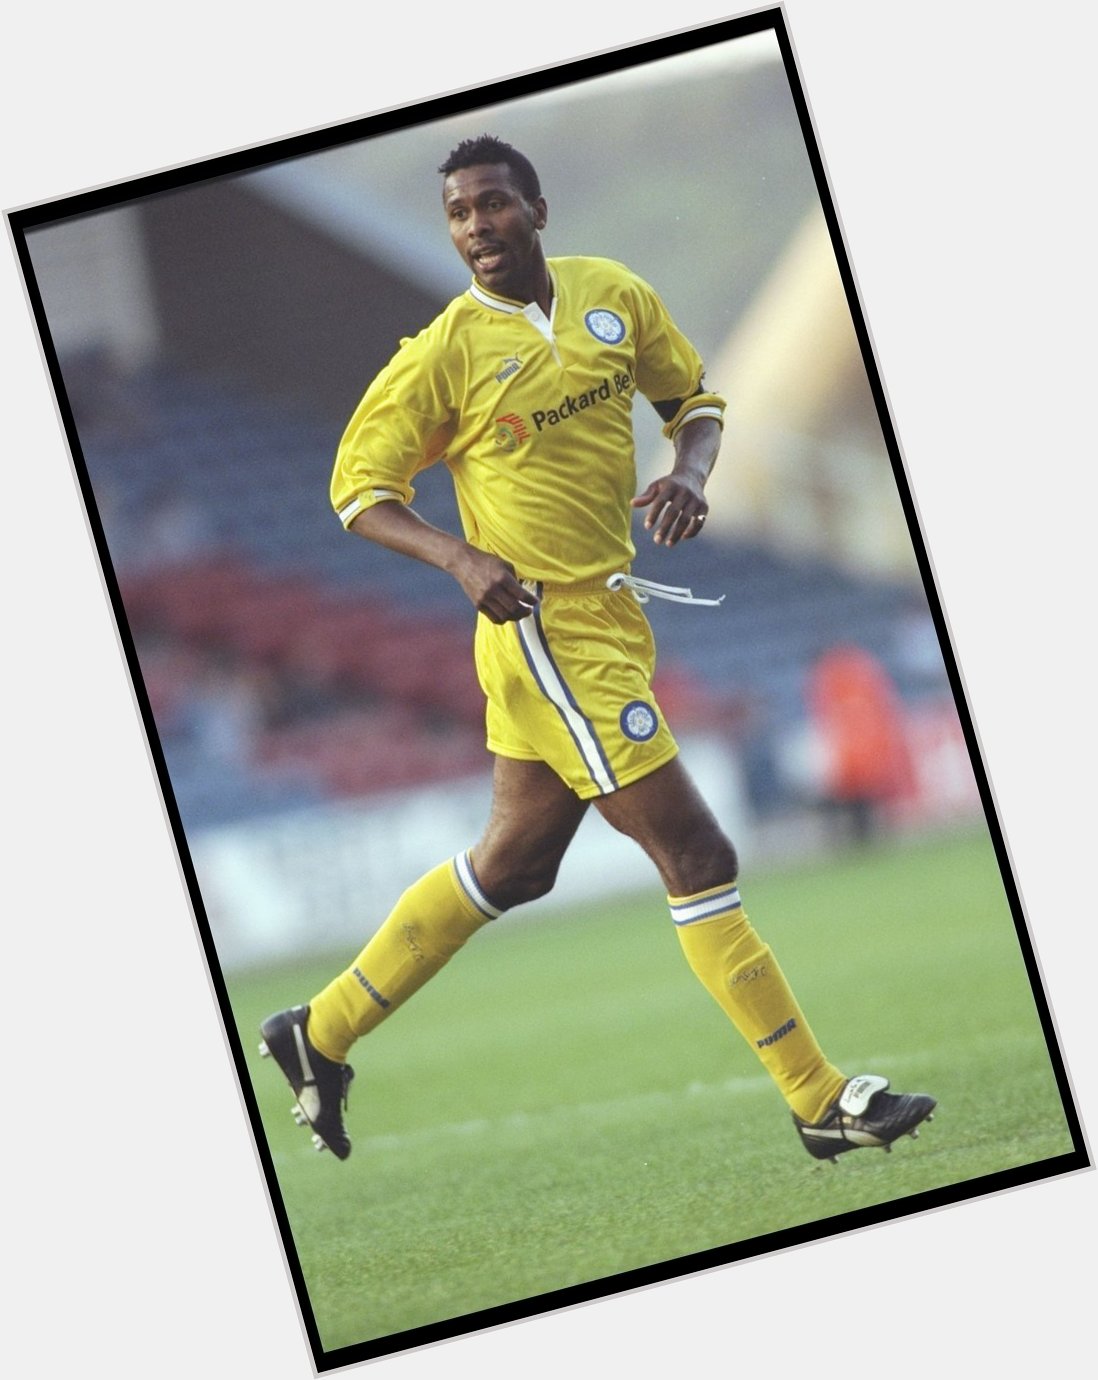 Happy 52nd birthday to Lucas Radebe, the great former Leeds United defender & captain    